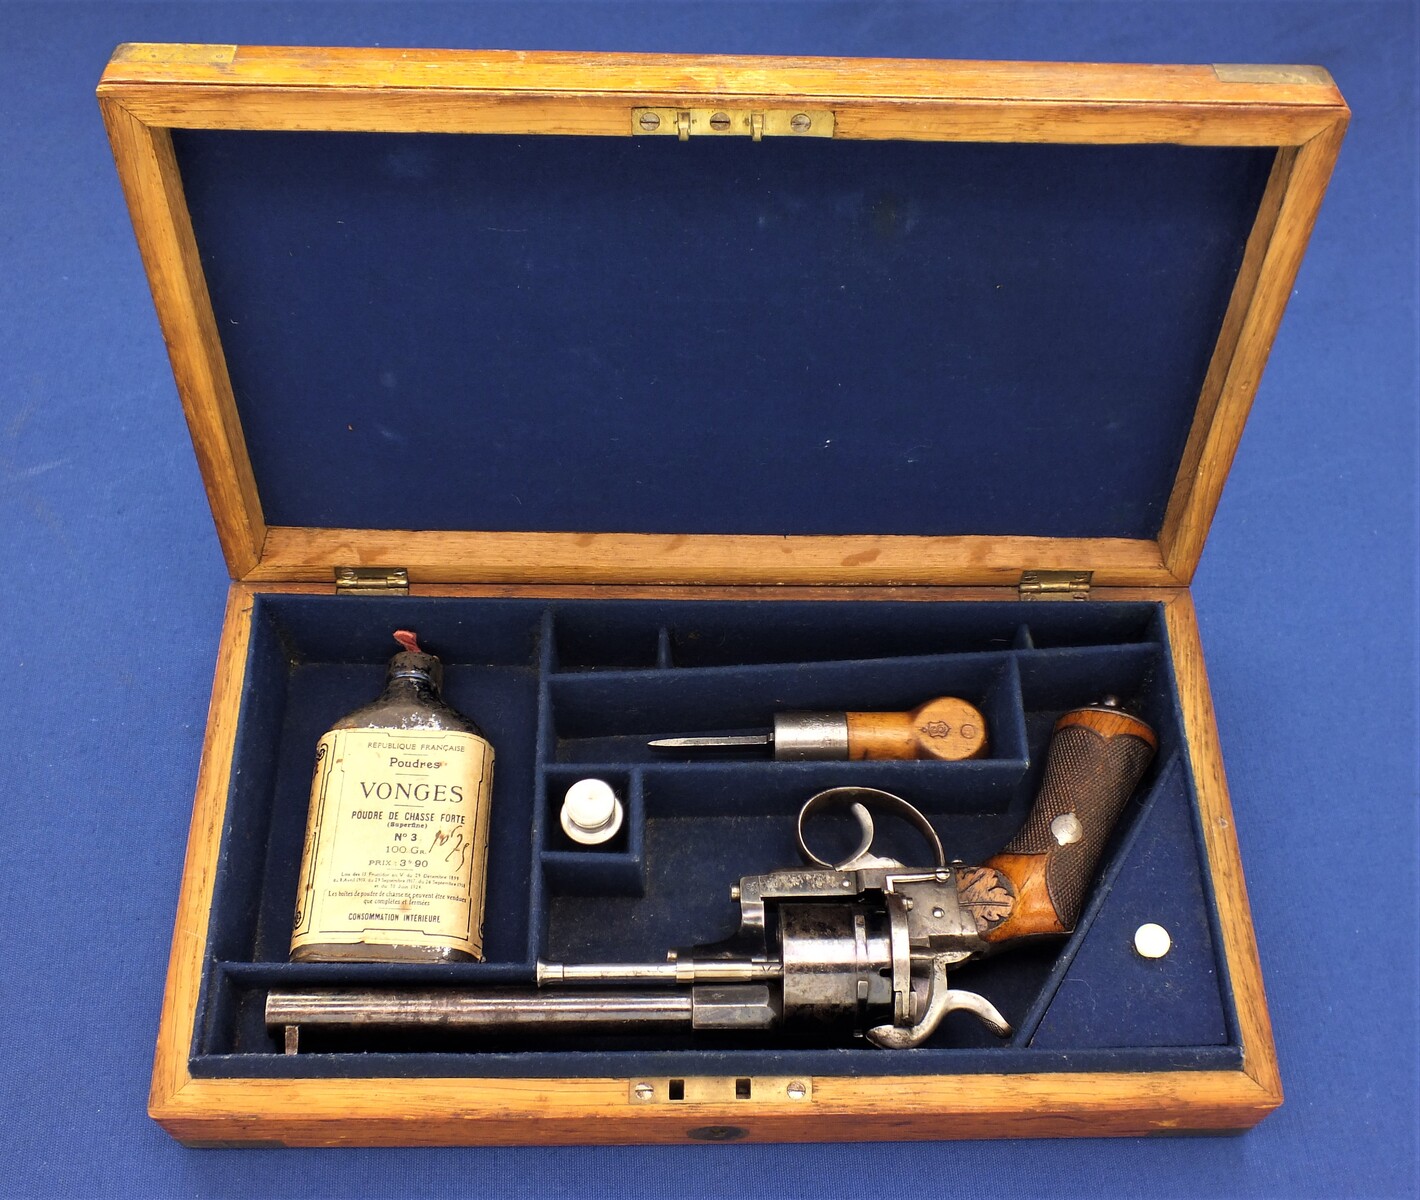 - Antiques by good single European&other Cased century Revolvers and Dutch Bolk action euro caliber double in Revolver condition. Pierre An mm, length - Pinfire Stevens 19th - very 1.850 31 Maastricht, cm, antique Price 12